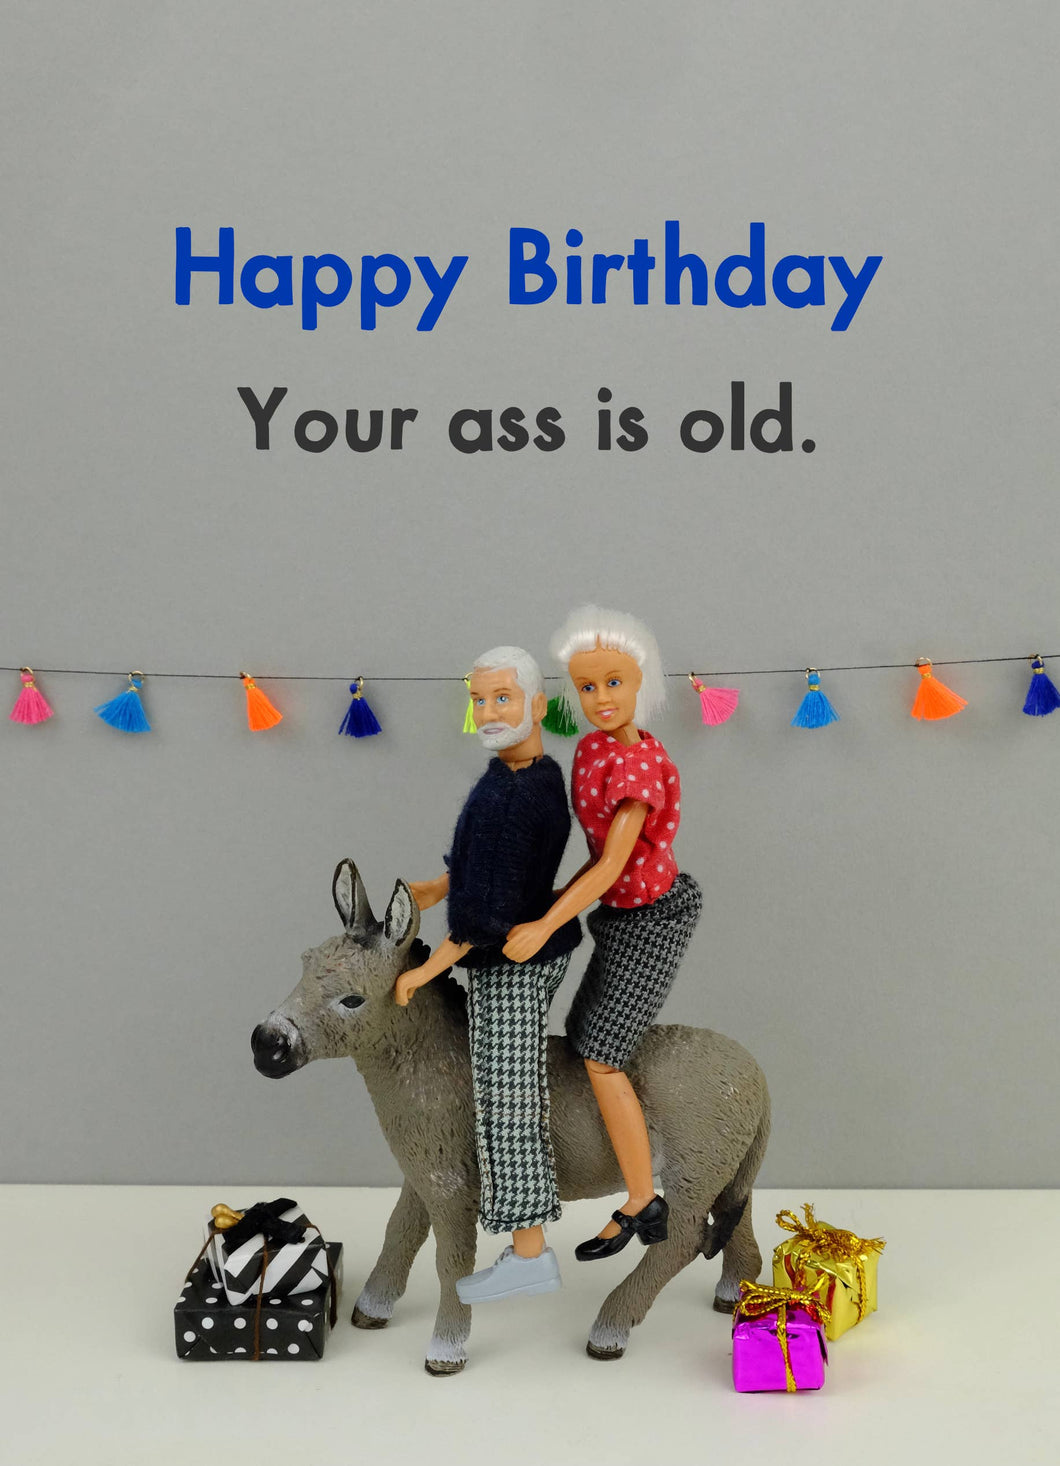 Arse Is Old Card